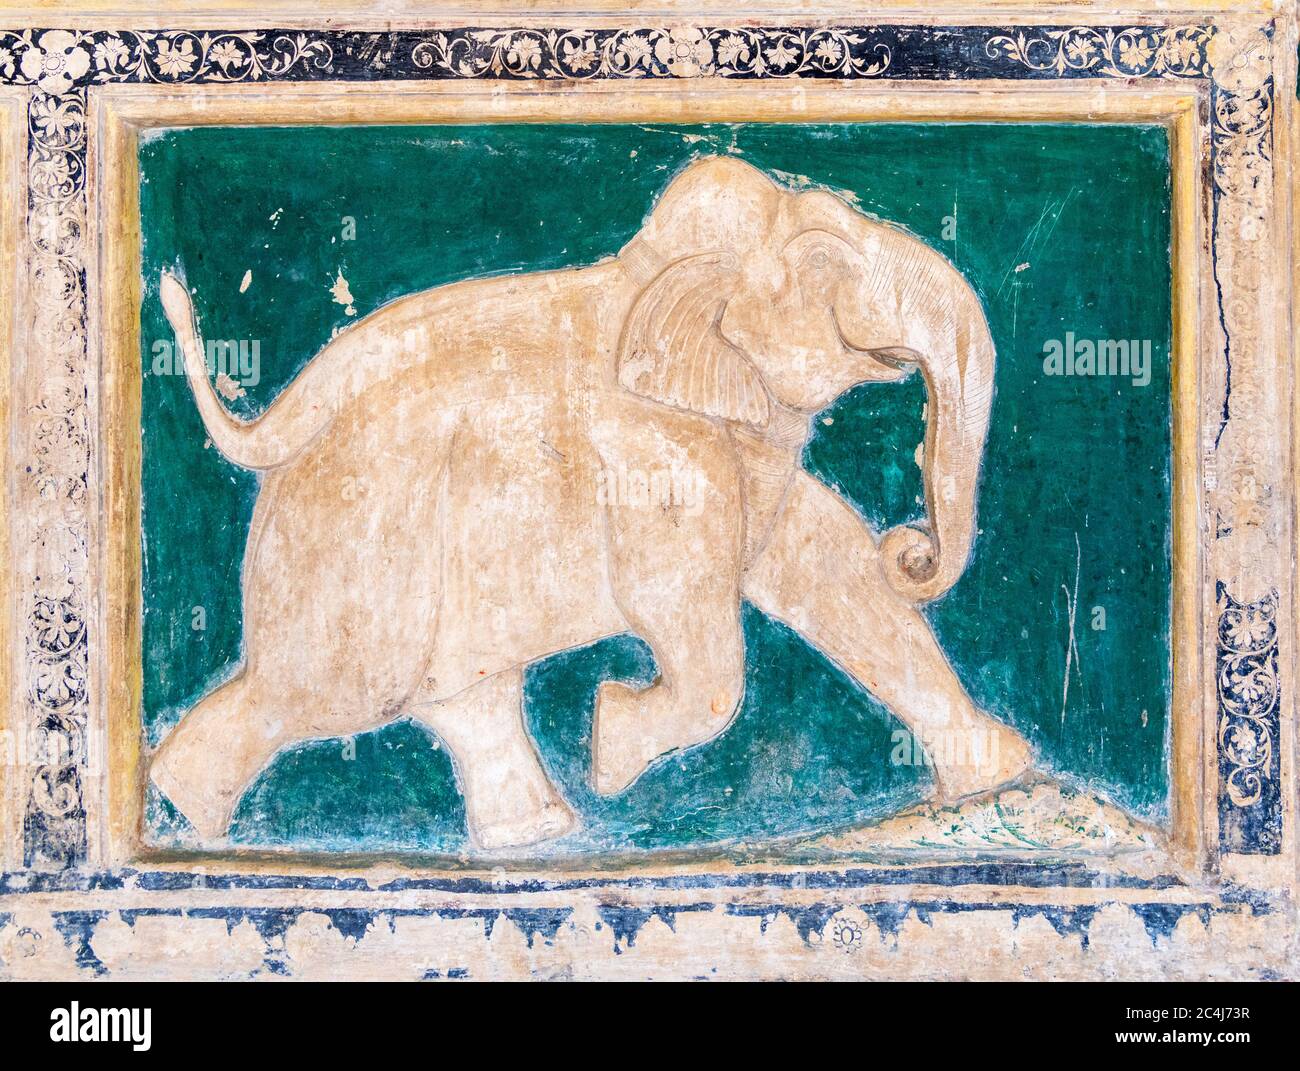 Relief carving of an elephant, City Palace, Old City, Udaipur, Rajasthan, India Stock Photo